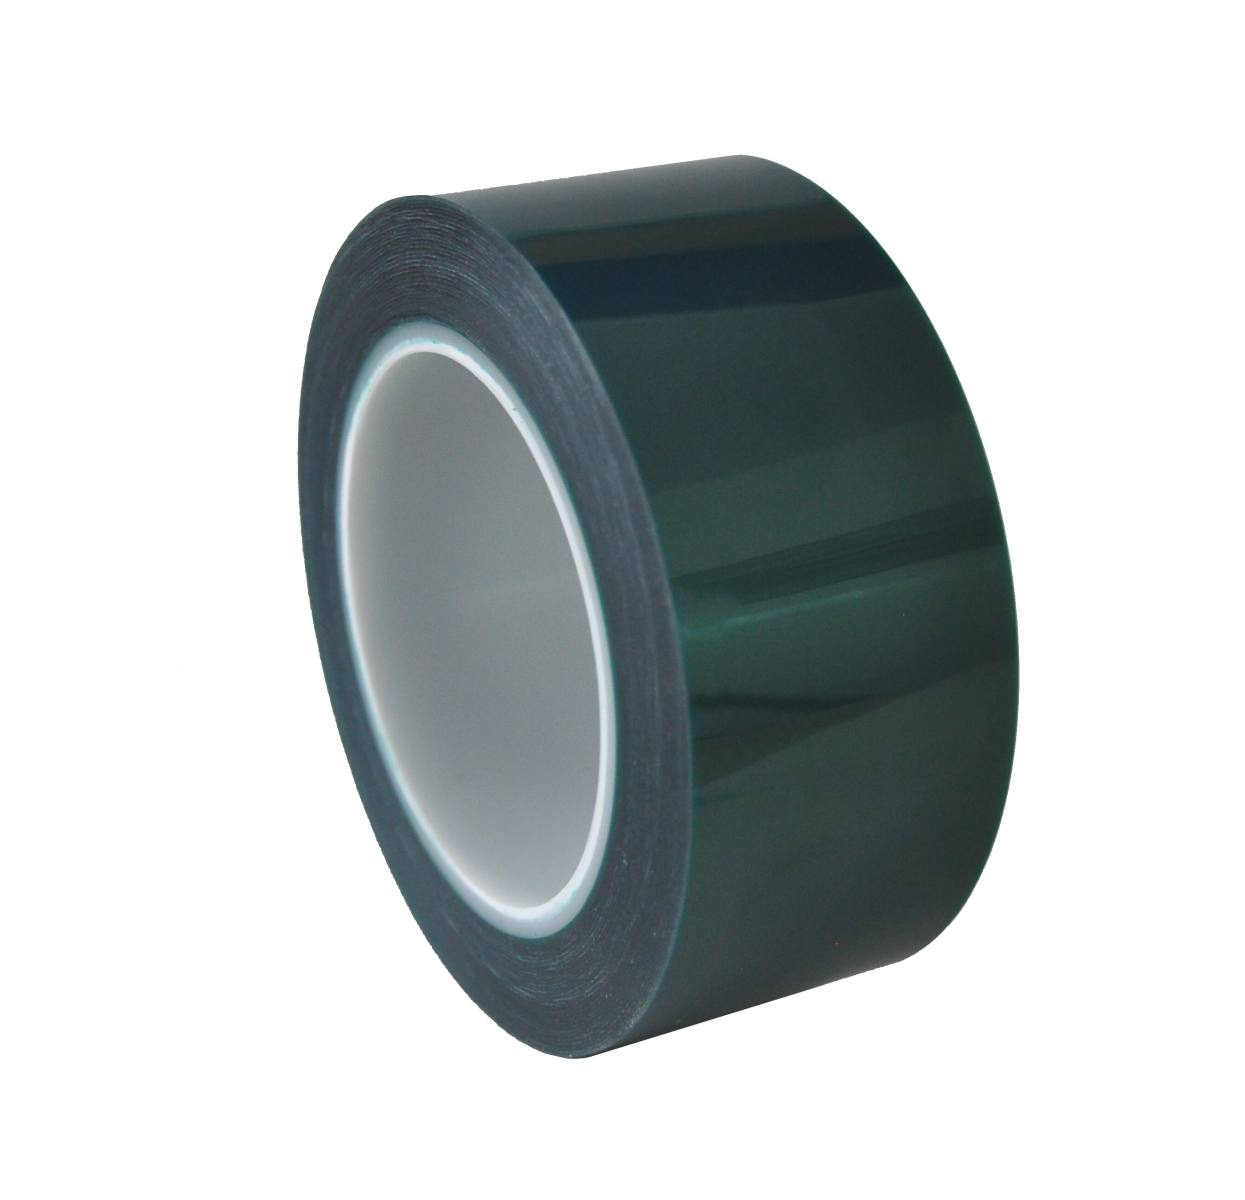 S-K-S 208G polyester adhesive tape, 15mmx66m, green